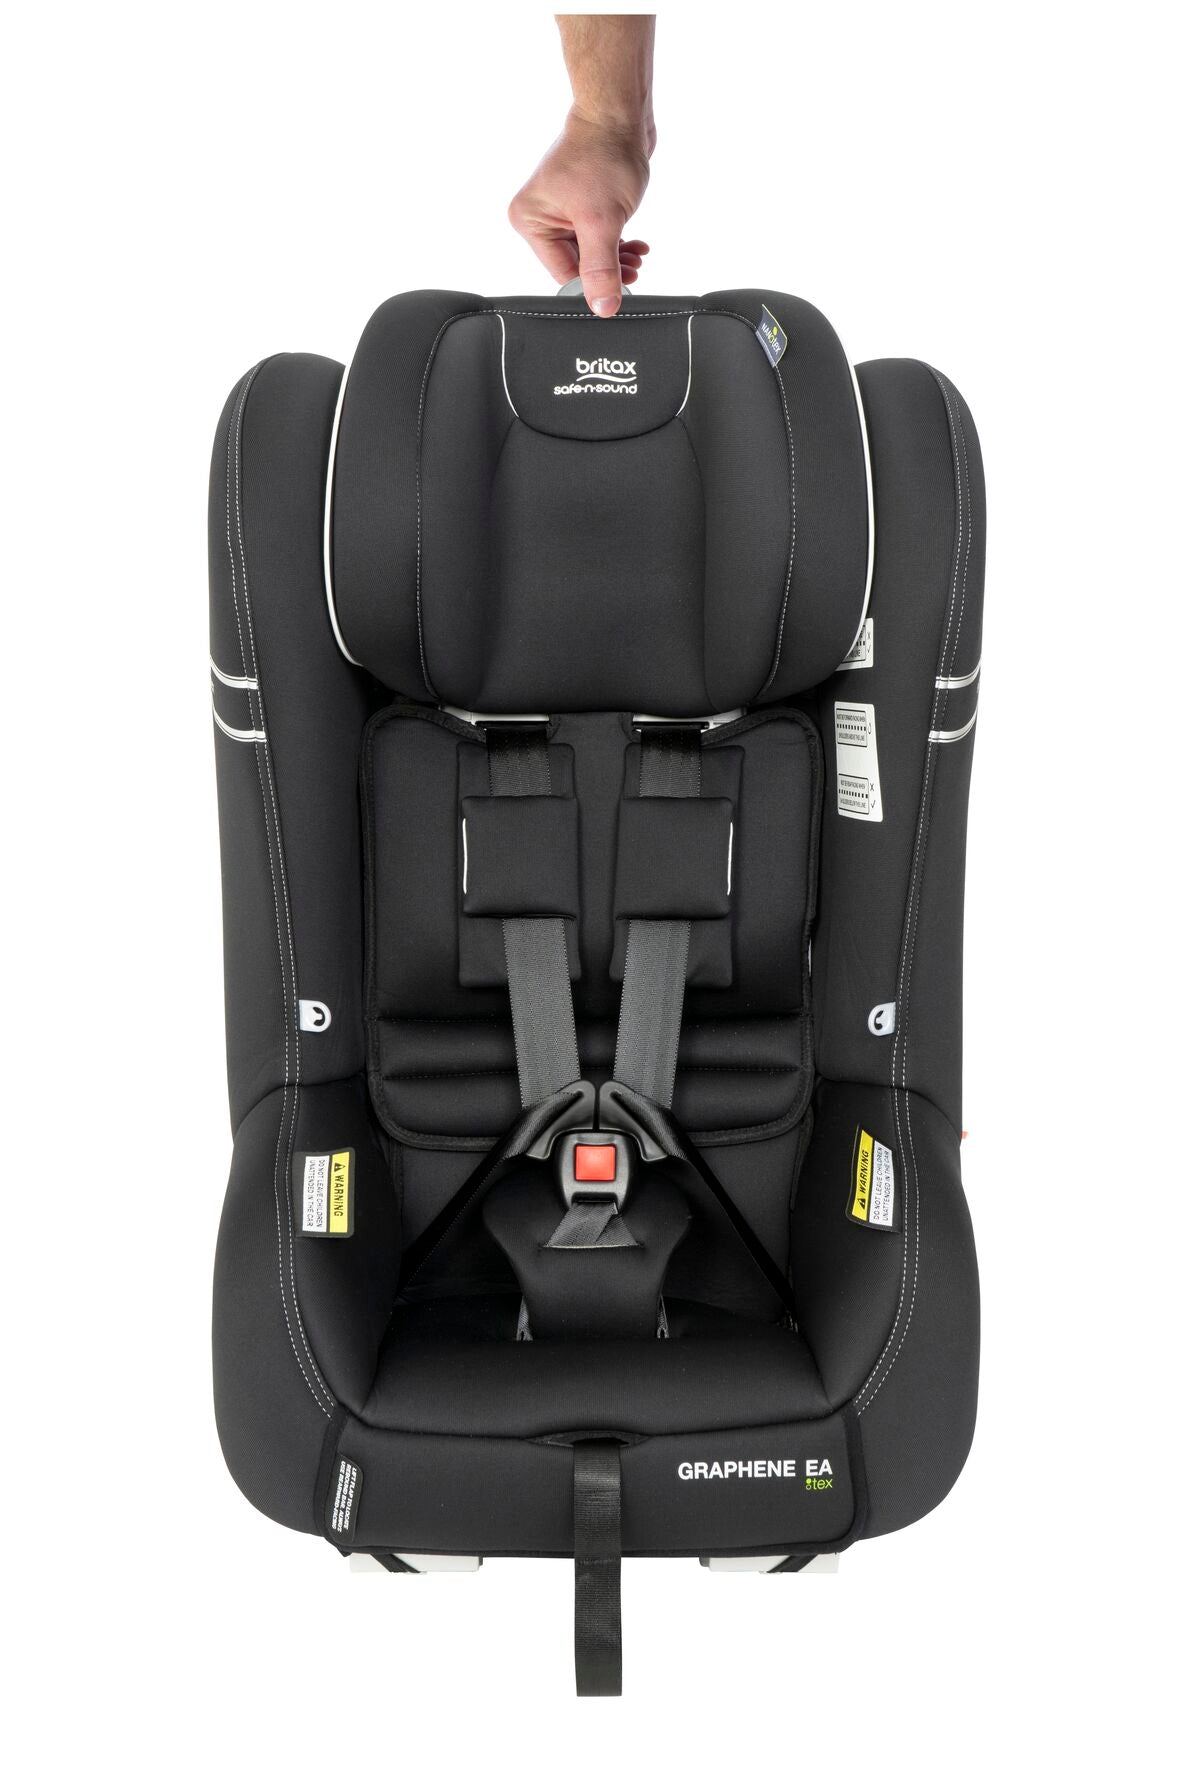 Britax  Safe-n-Sound Graphene TEX EA - Tiny Tots Baby Store 